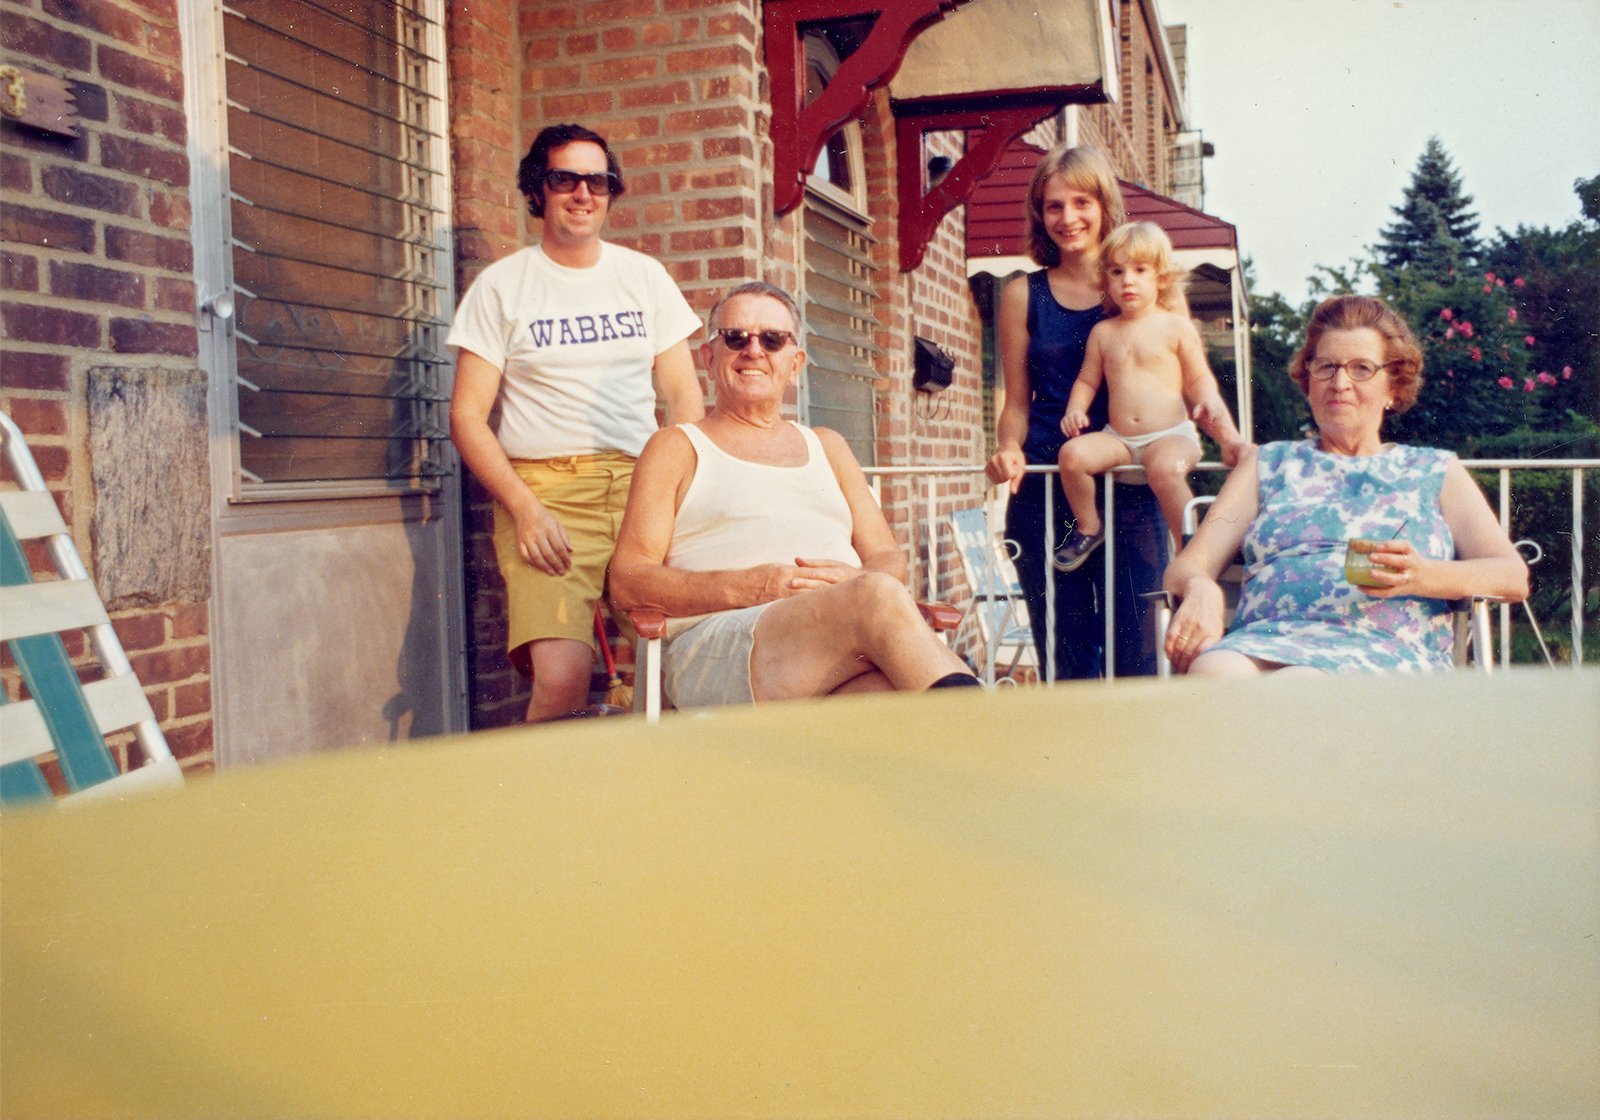 Stuart (in Wabash t-shirt) at his uncle and aunt Paddy and Catherine Hetherington’s house, 1976.